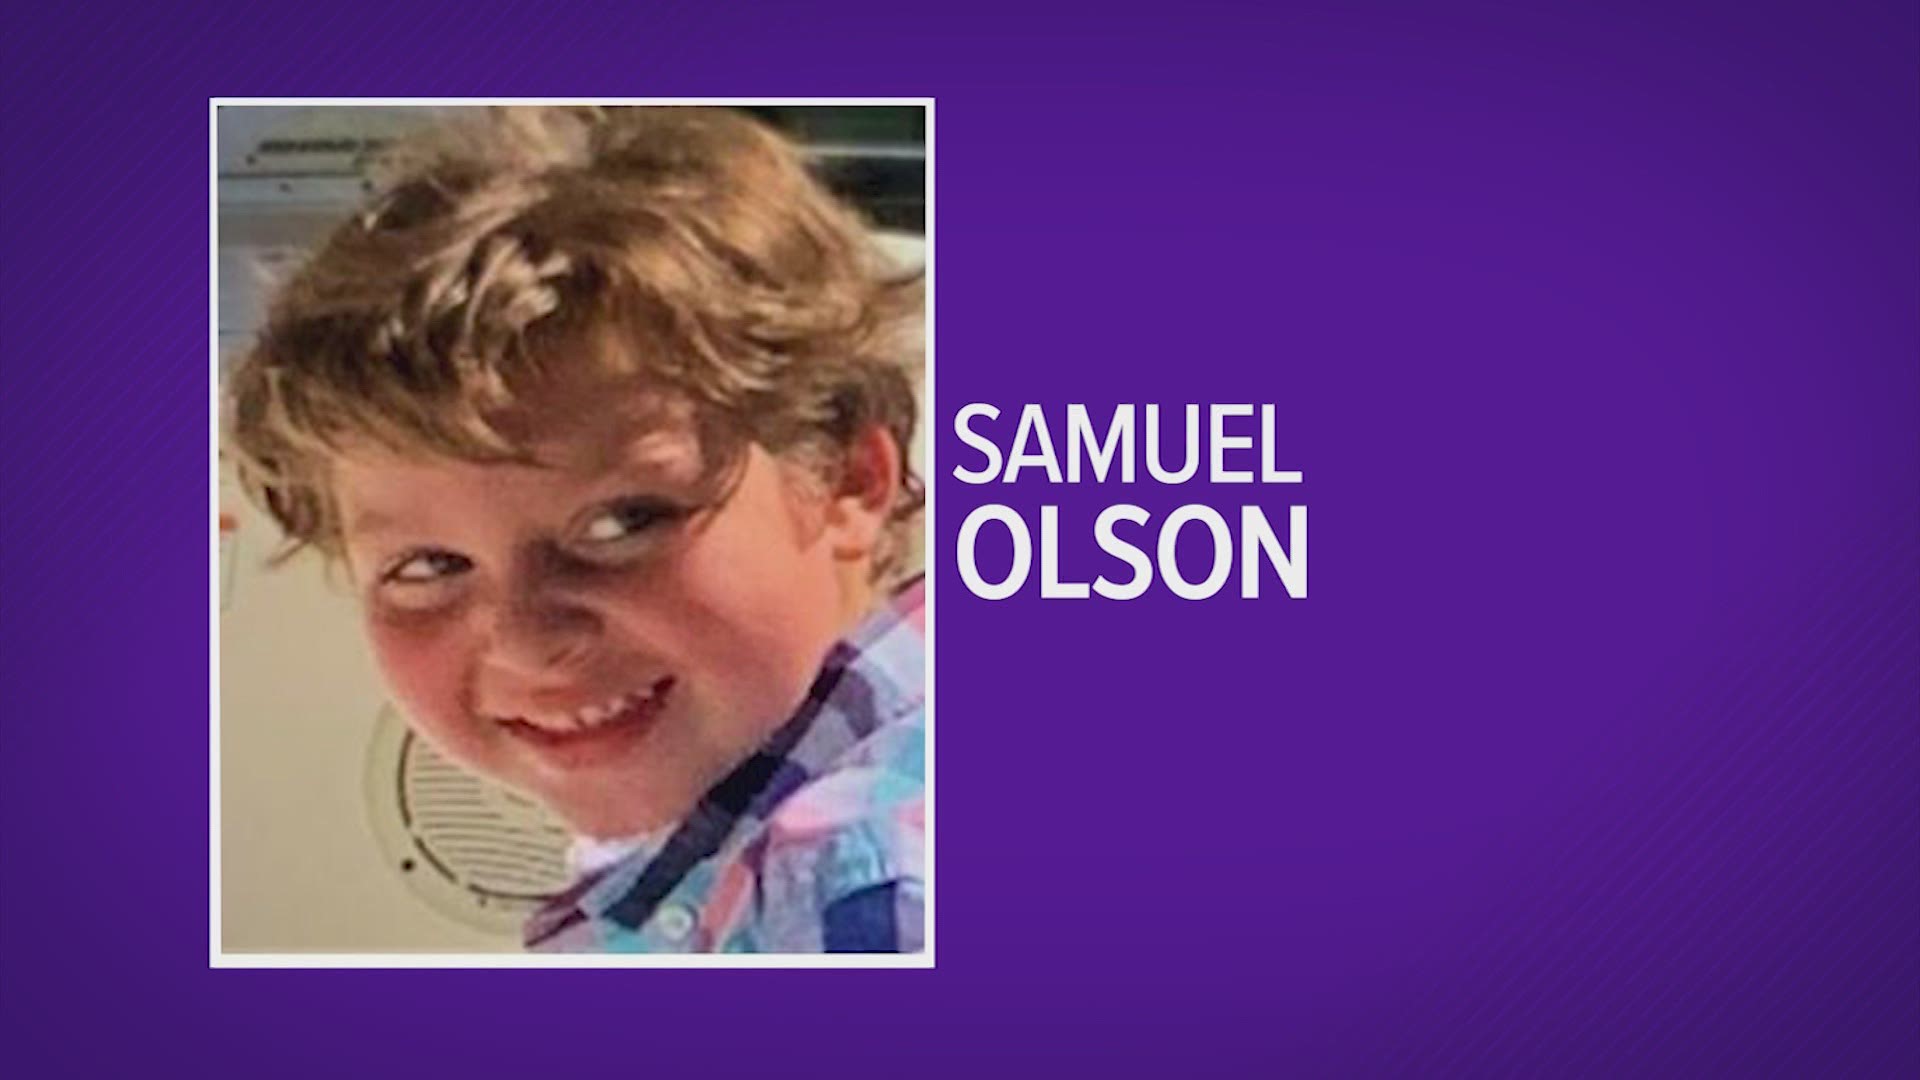 Samuel Olson, 5, was last seen leaving the 8800 block of McAvoy Drive heading in an unknown direction.